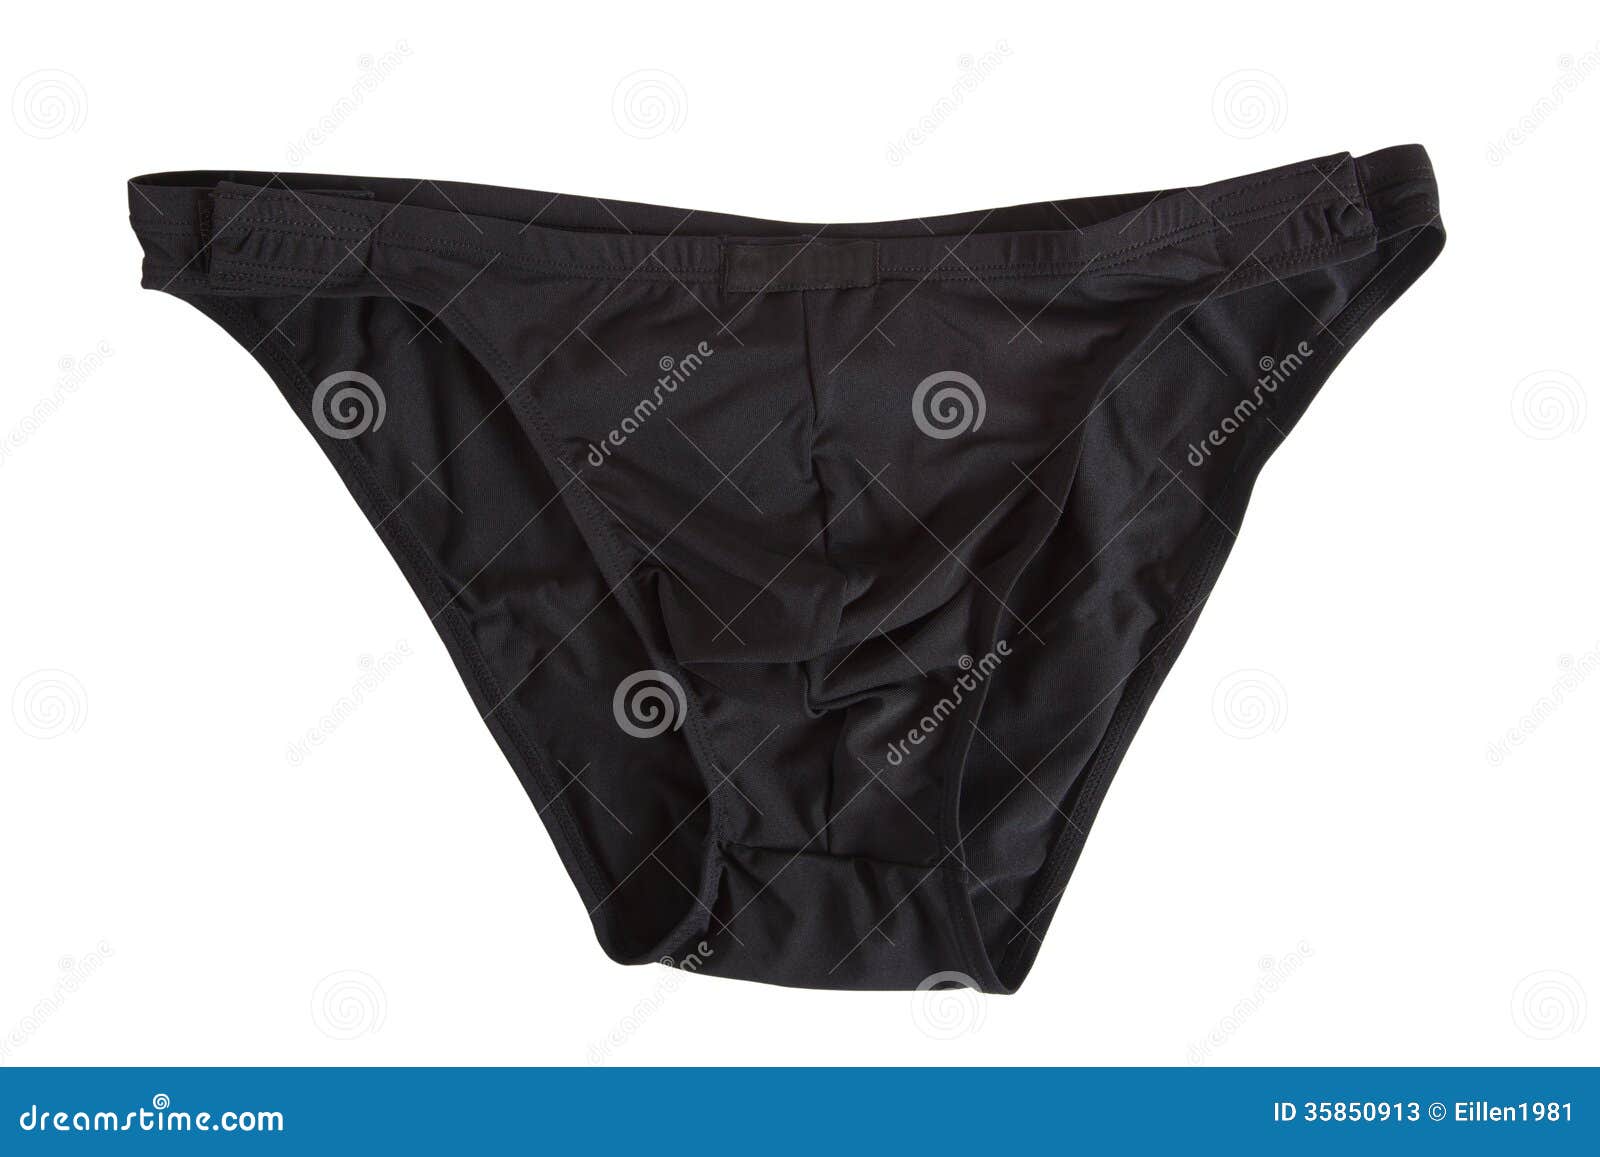 Black Man S Swimming Panties Stock Image - Image of contemporary, front ...